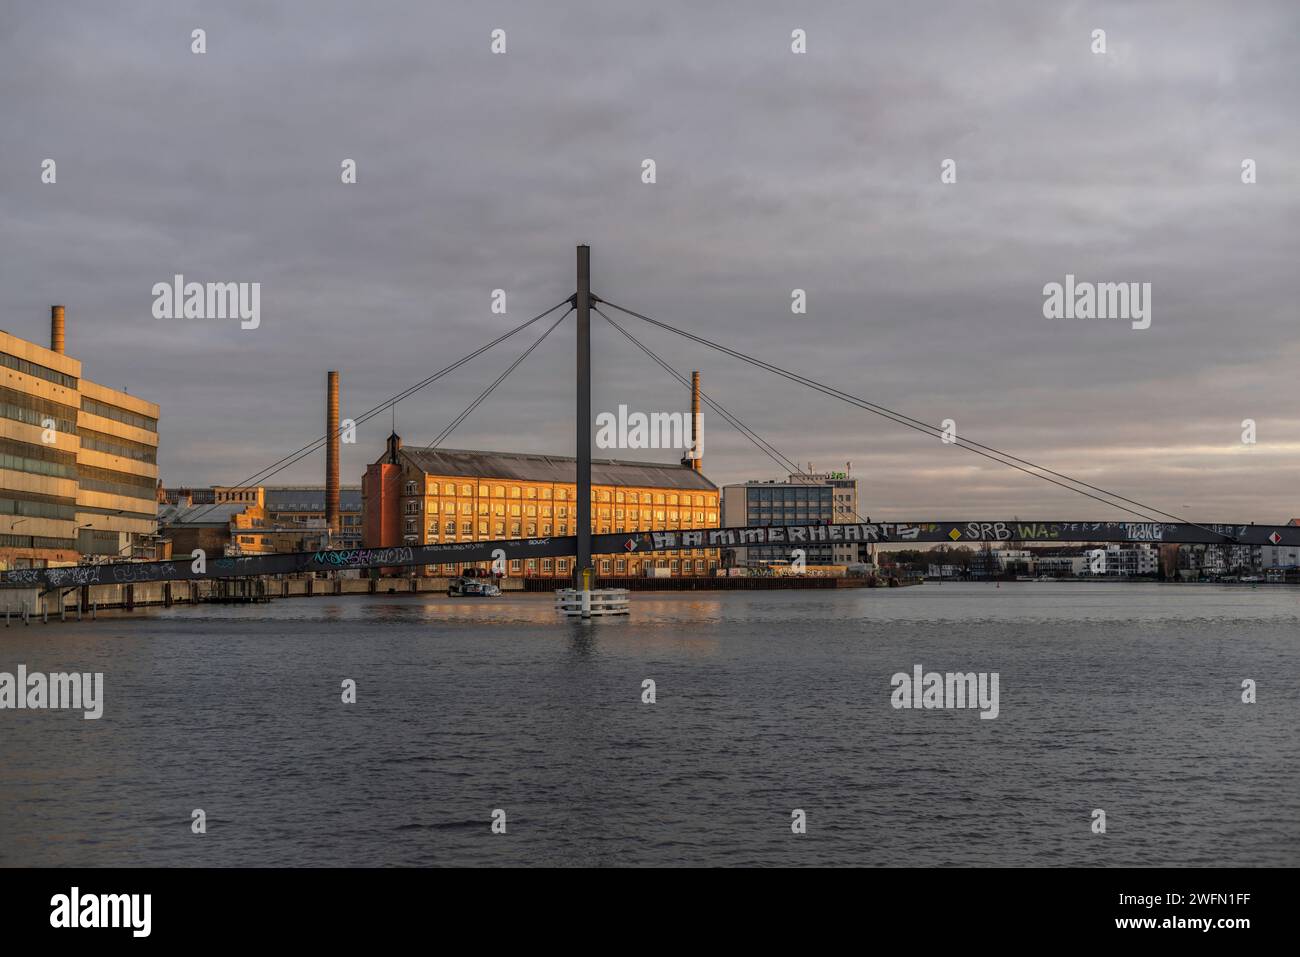 The former KWO (Kabelwerk Oberspree) listed building and the Kaisersteg Brucke in the foreground during sunset, Treptow - Koepenick, Berlin, Germany Stock Photo